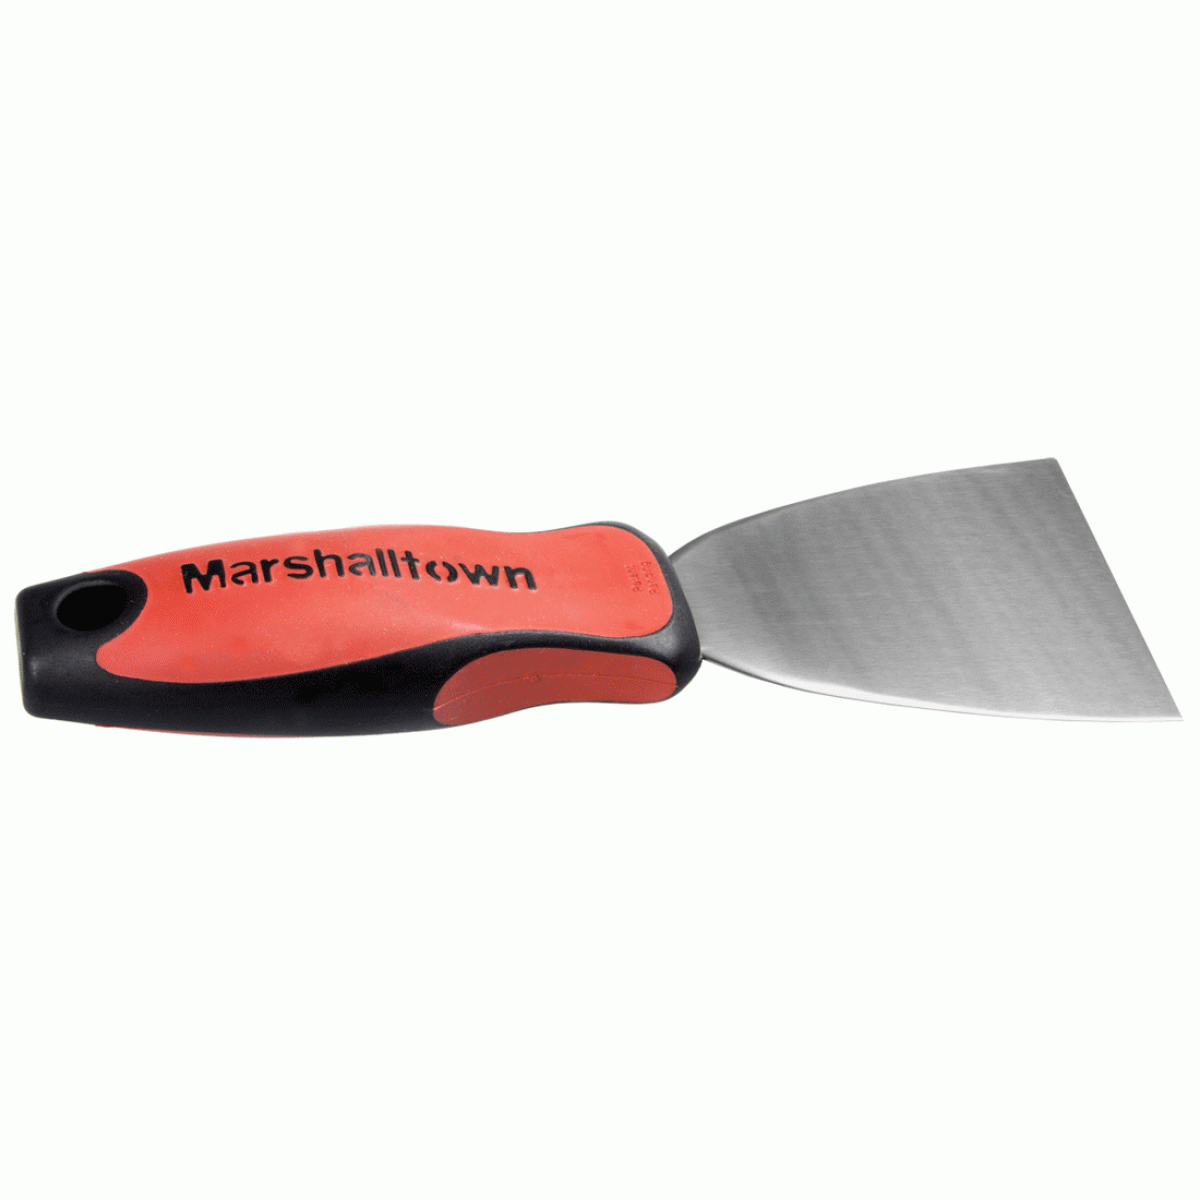 Marshall Town 100mm Pty Knife